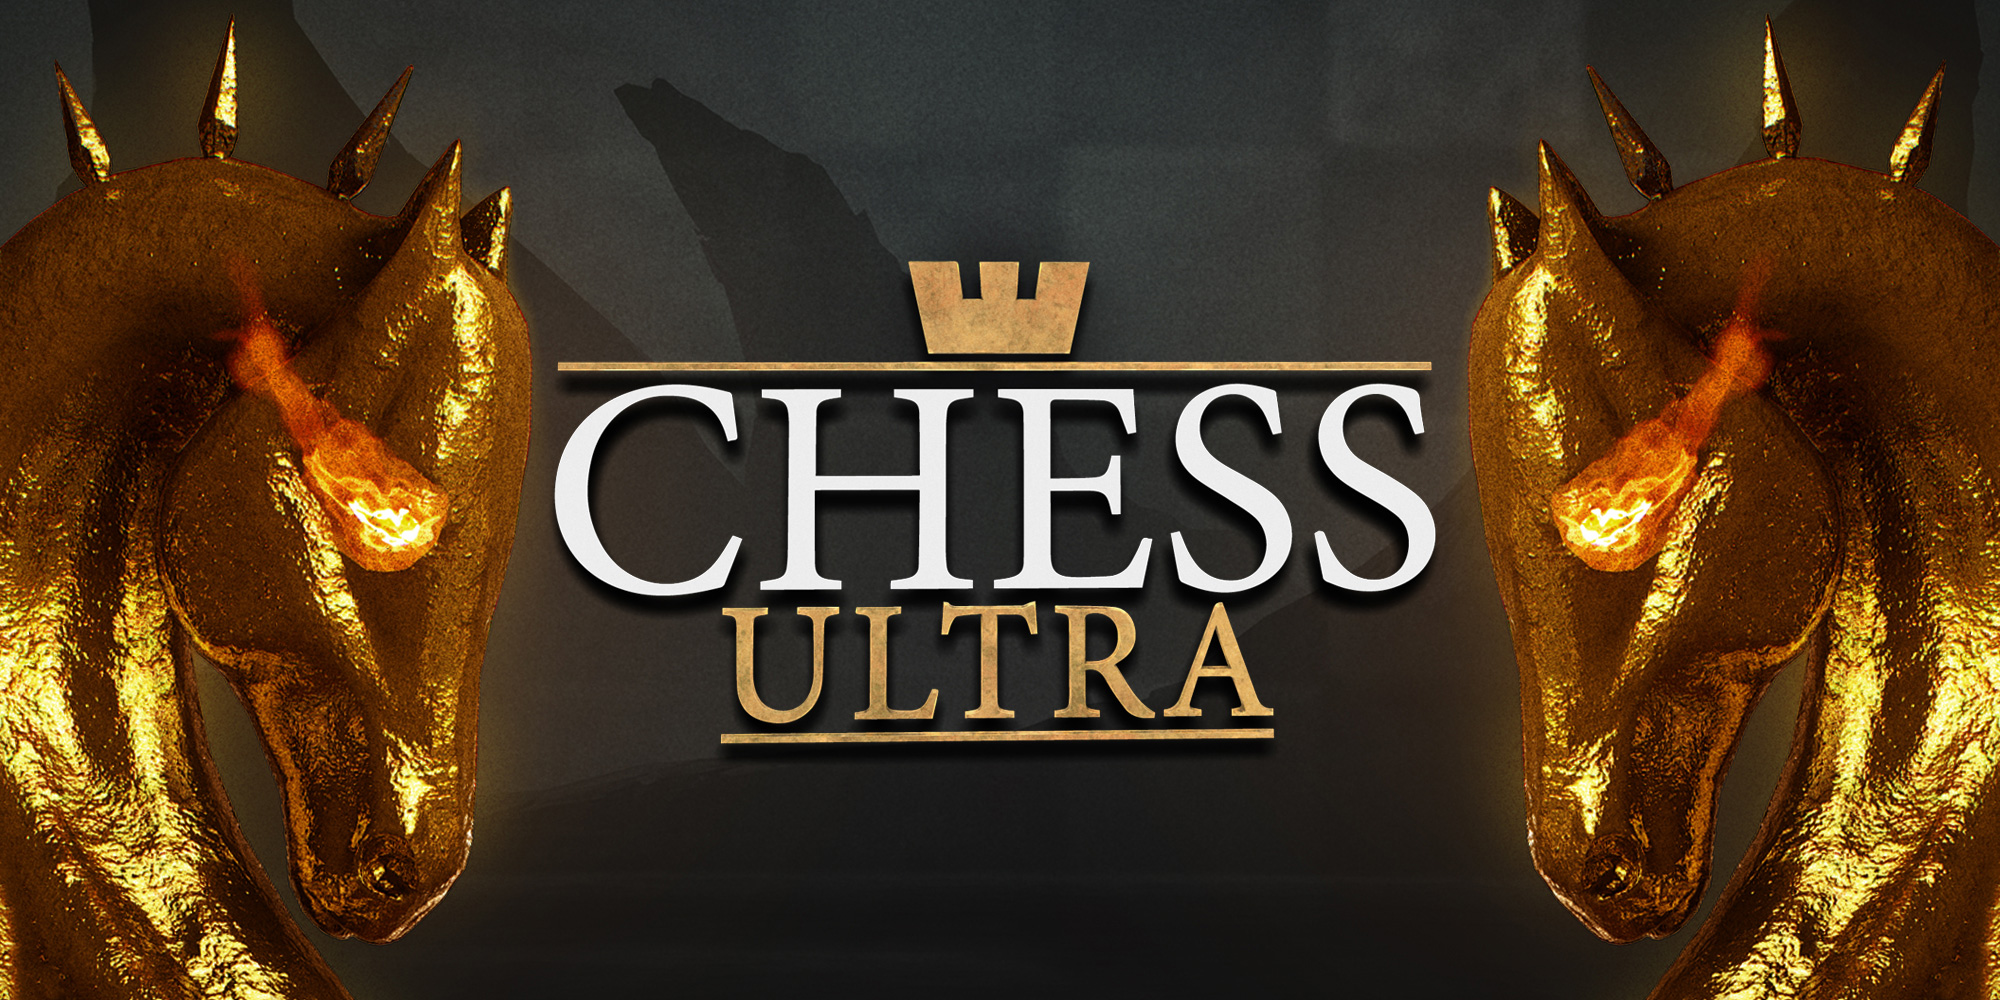 Chess Ultra Imperial Chess Set